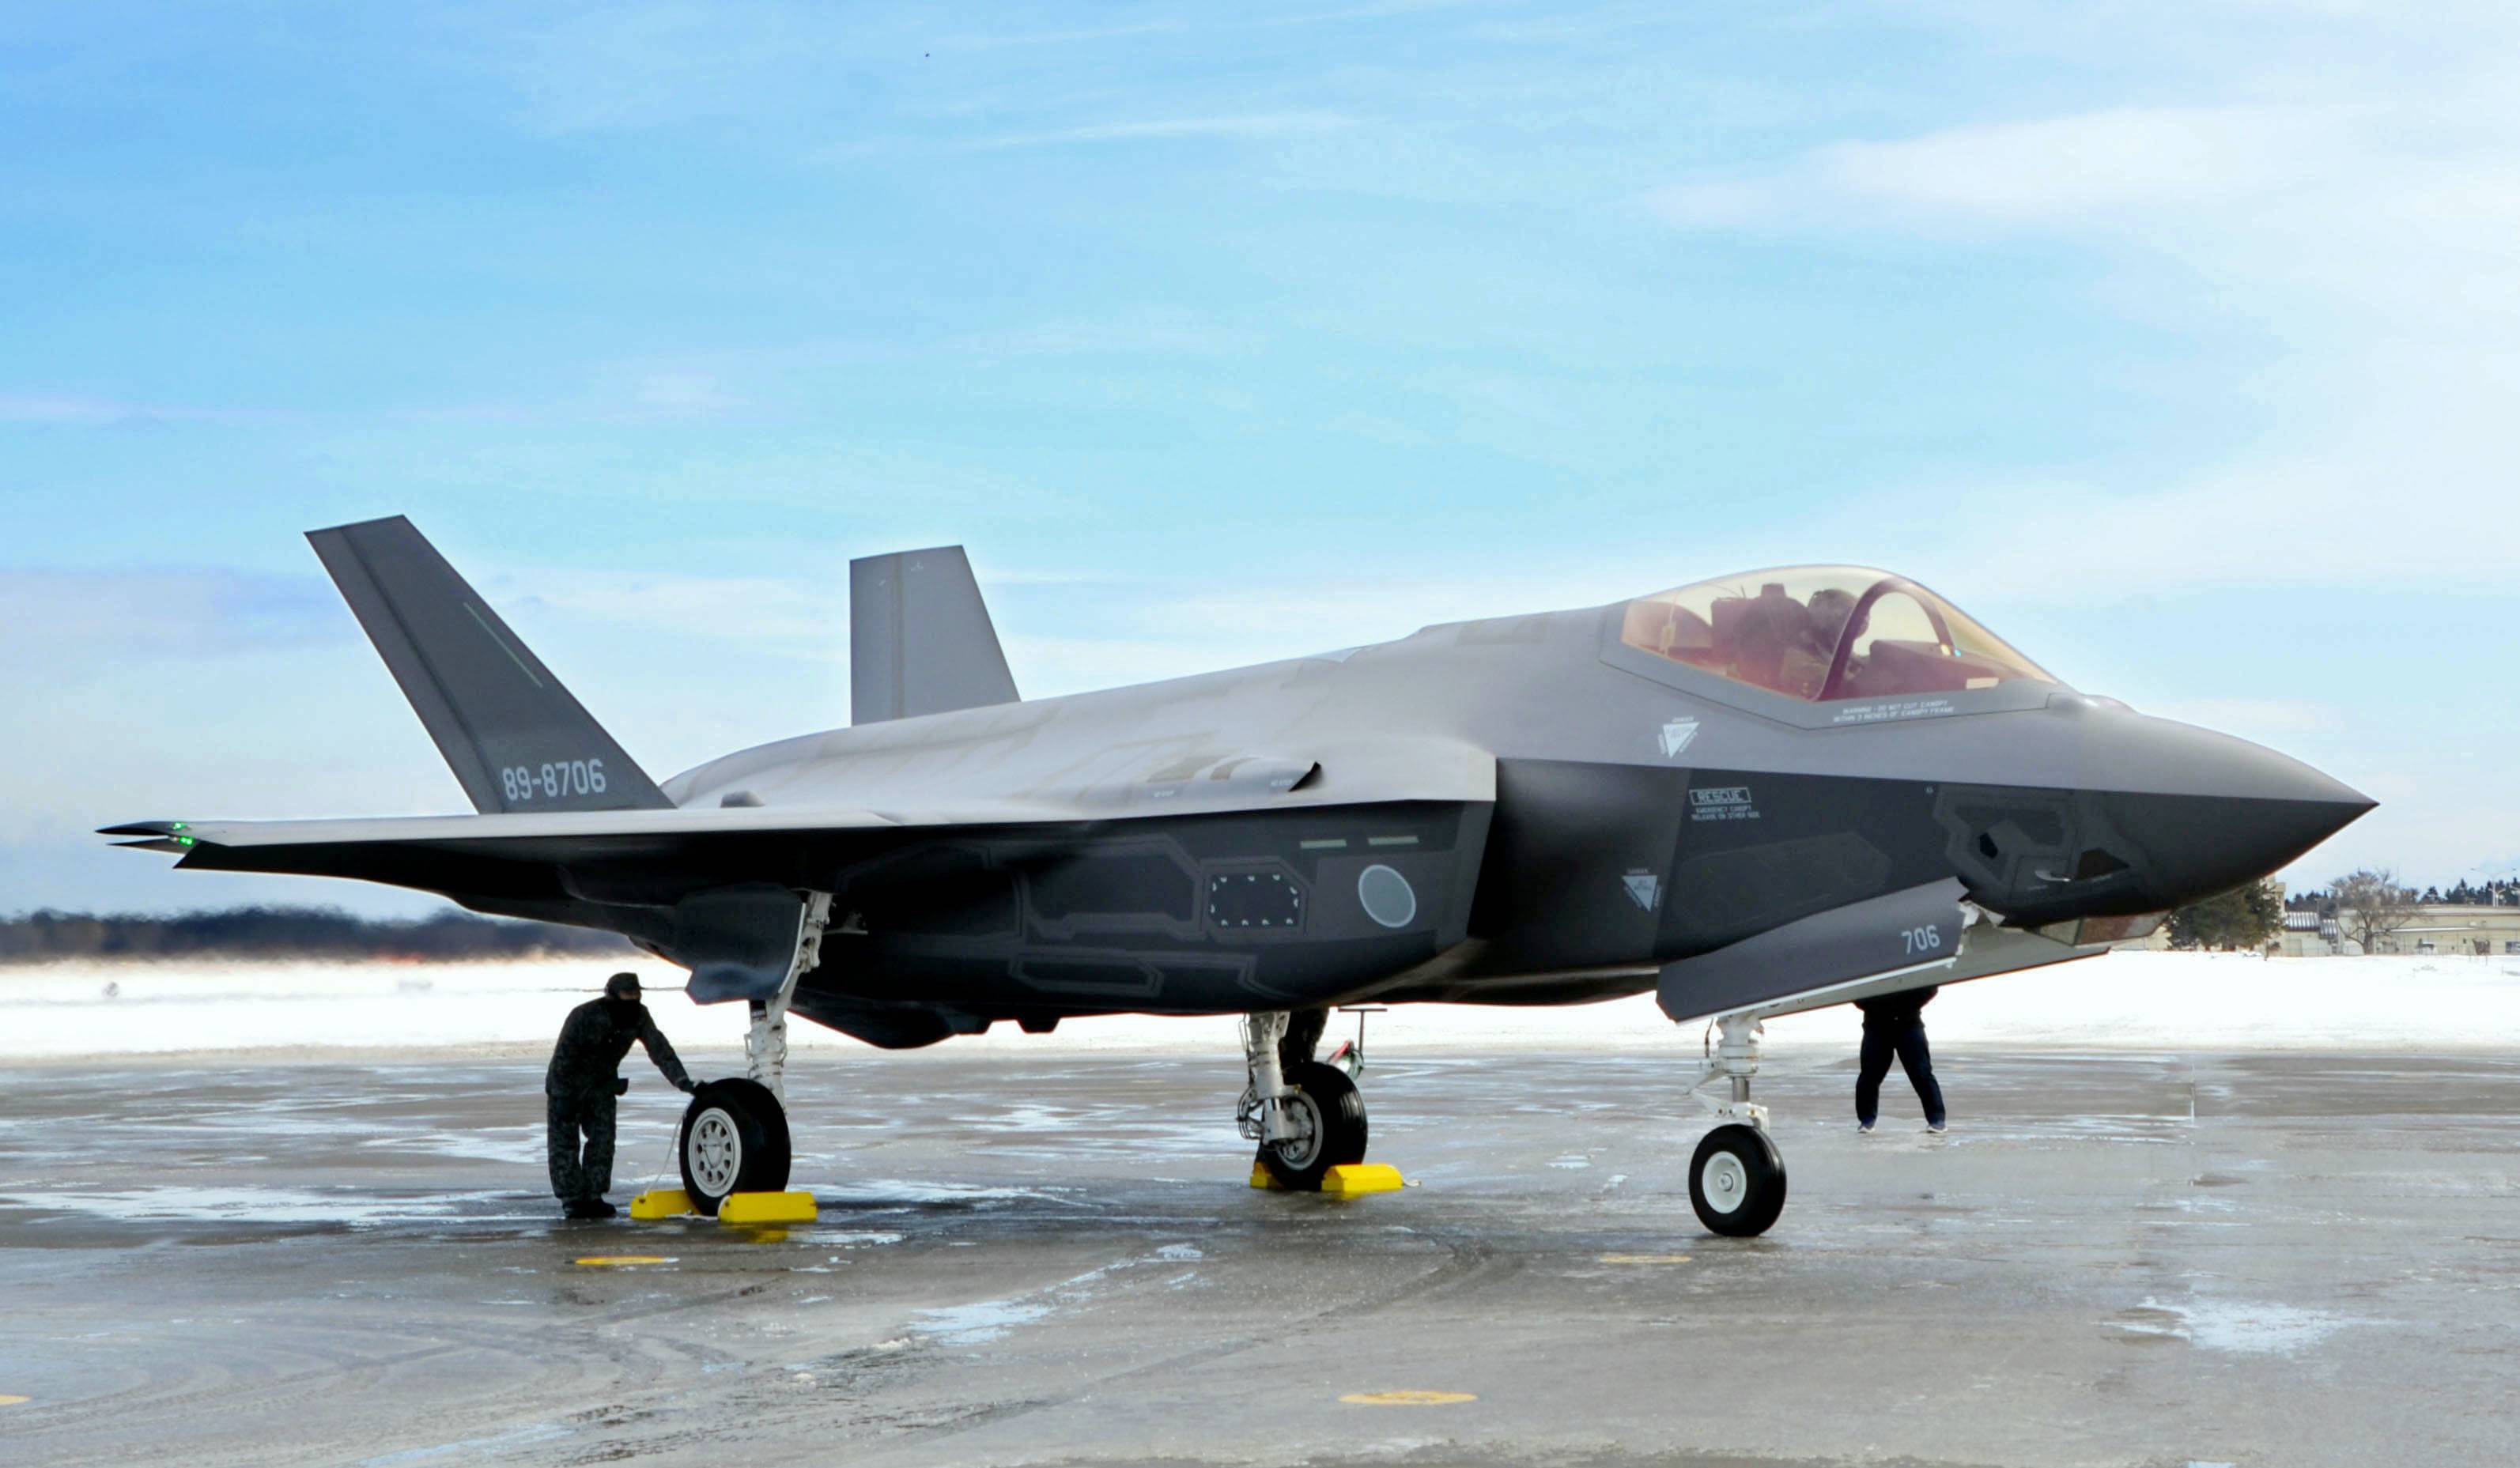 An F-35A stealth fighter jet at Misawa Air Base in Aomori Prefecture in January 2018 | KYODO